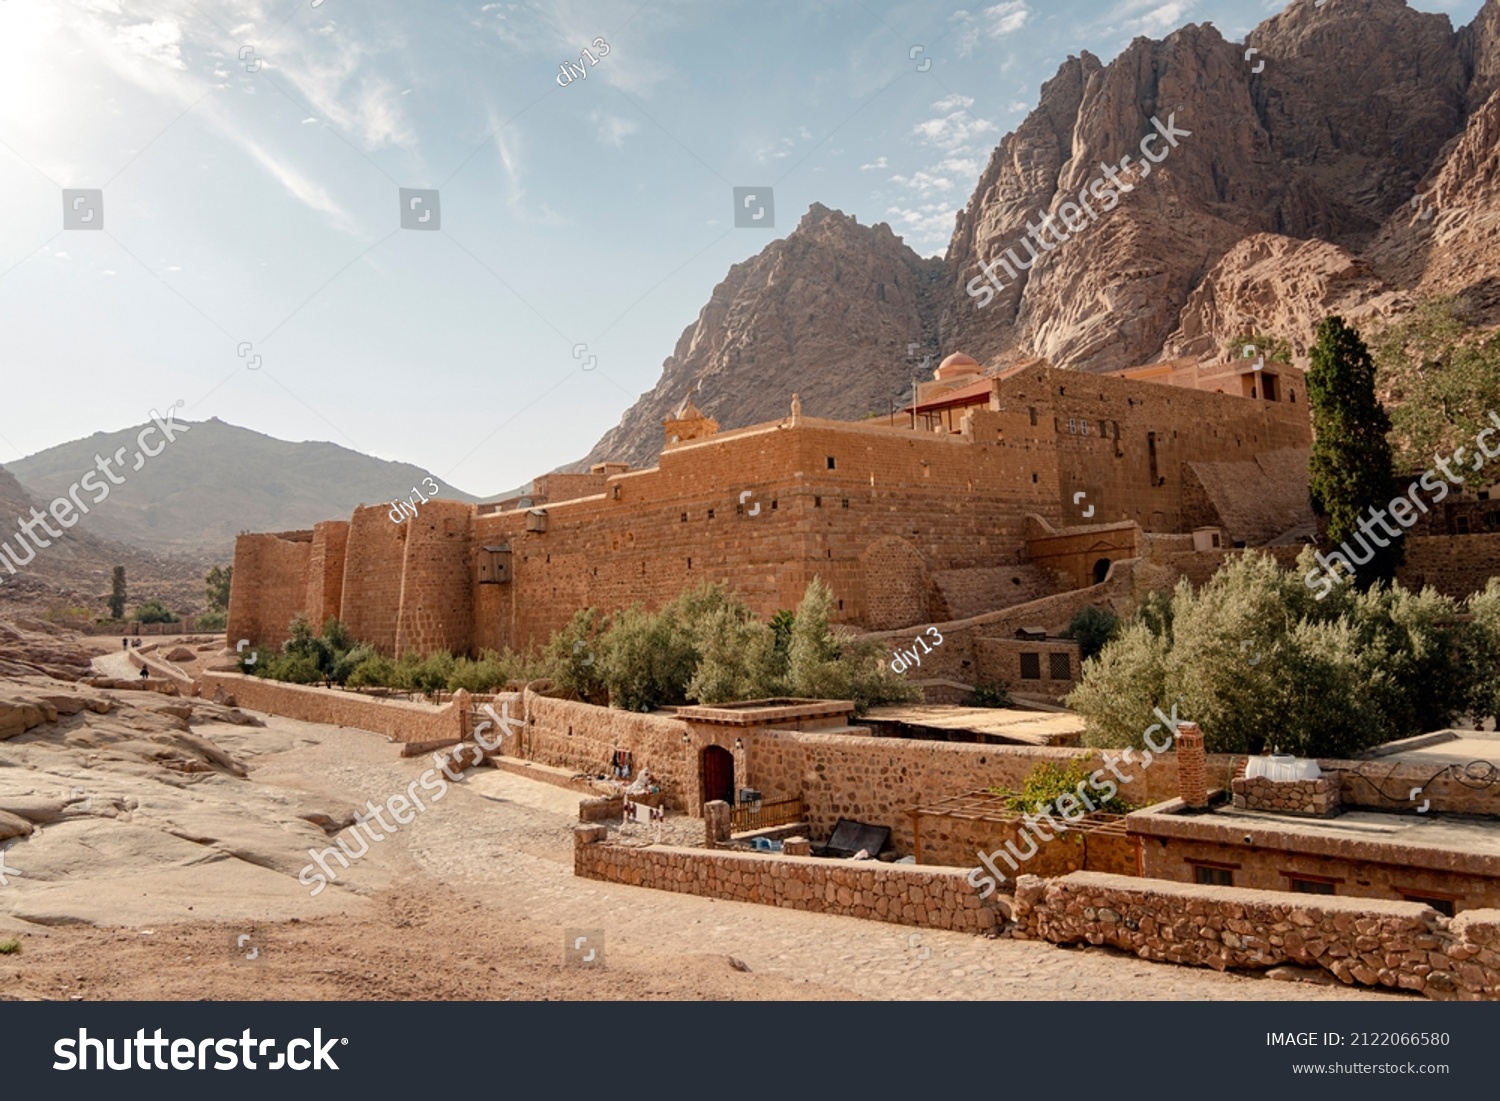 St. Catherine's Monastery, located in desert of Sinai Peninsula in Egypt at the foot of Mount Moses #2122066580